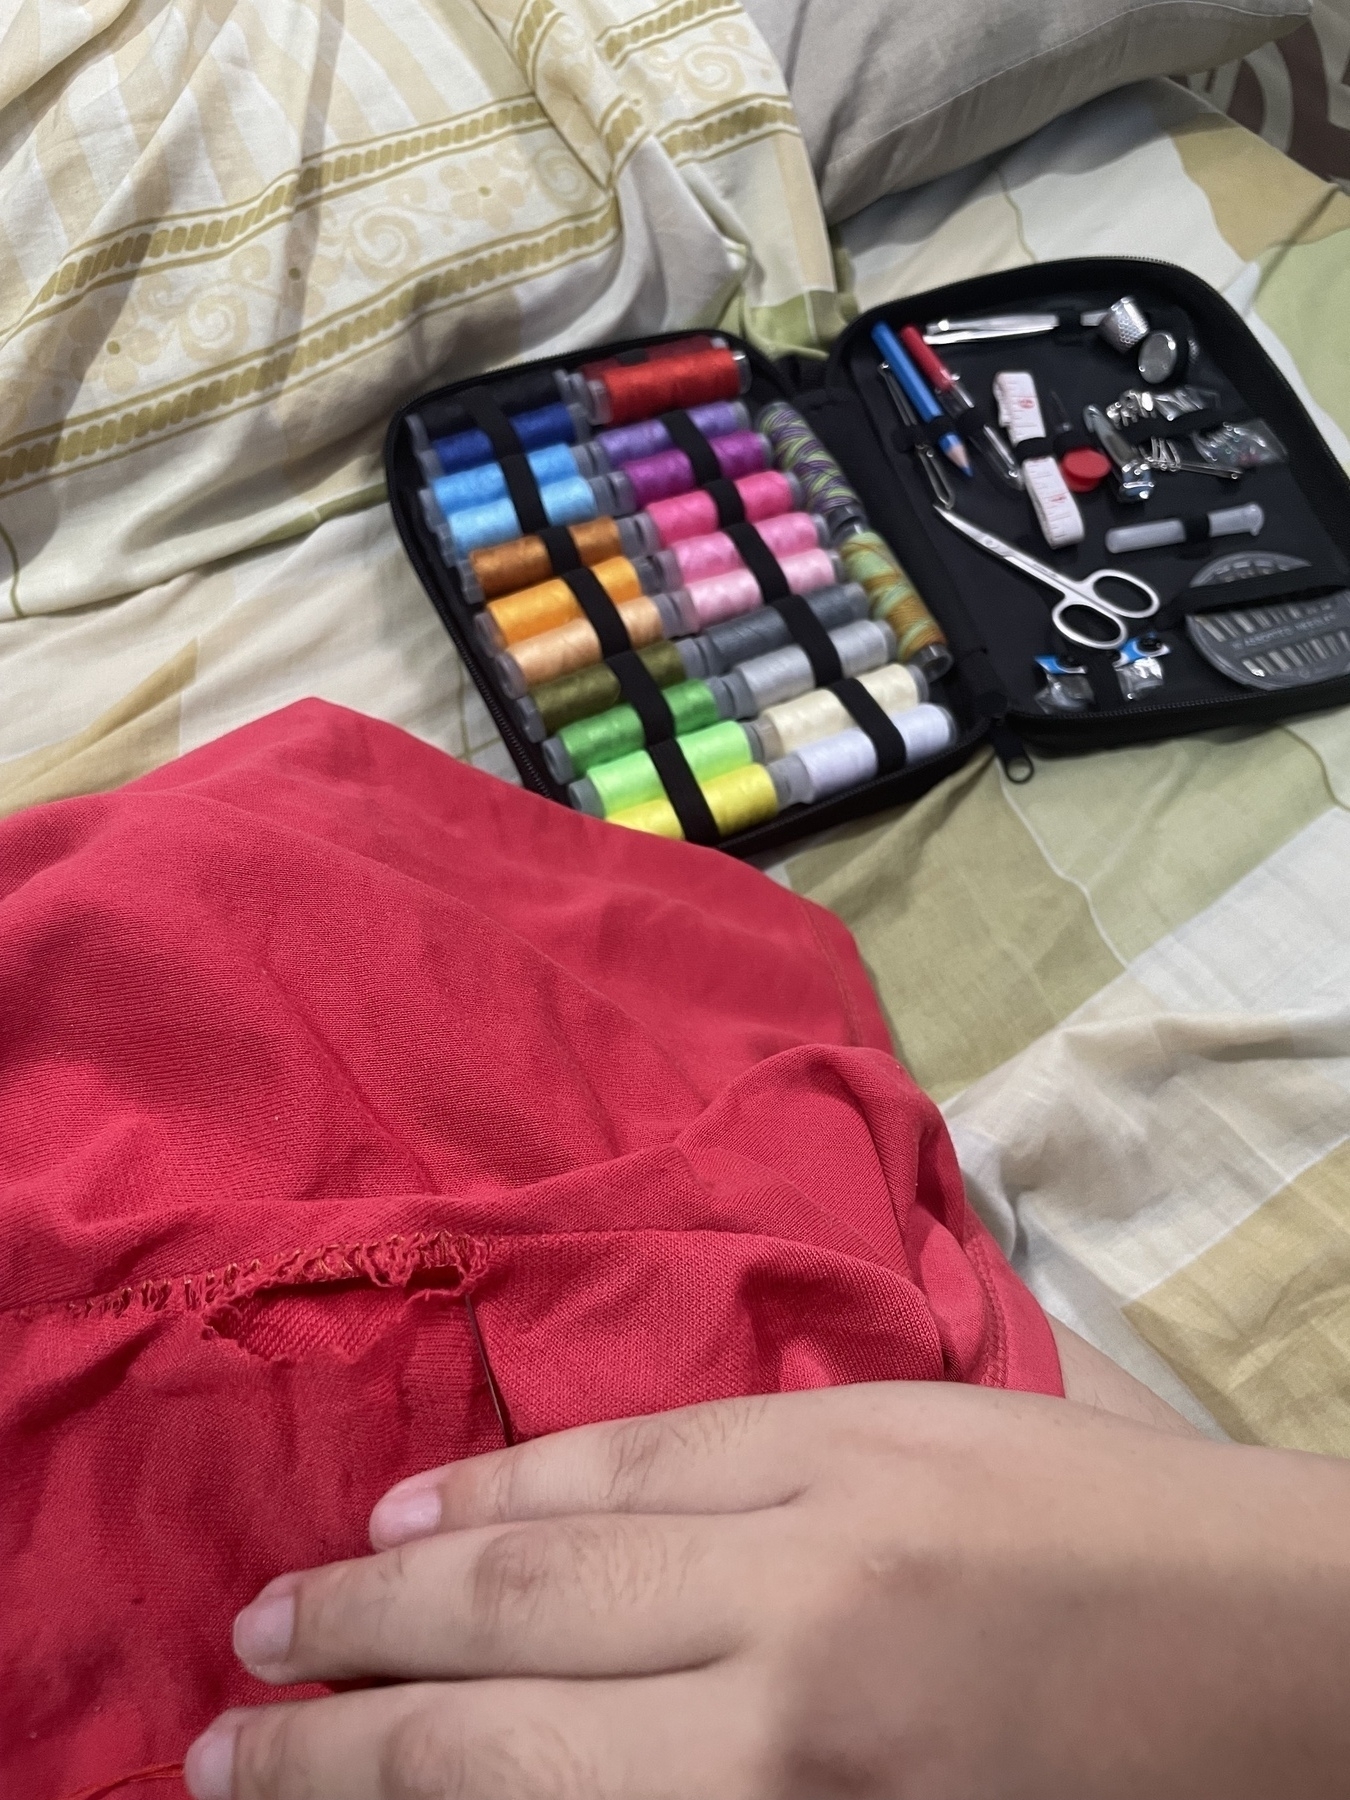 Chi has one of her red shorts with a big hole in it on her lap, and next to her knee is a sewing kit with a bunch of different colored threads and other sewing materials in the black clutch bag.